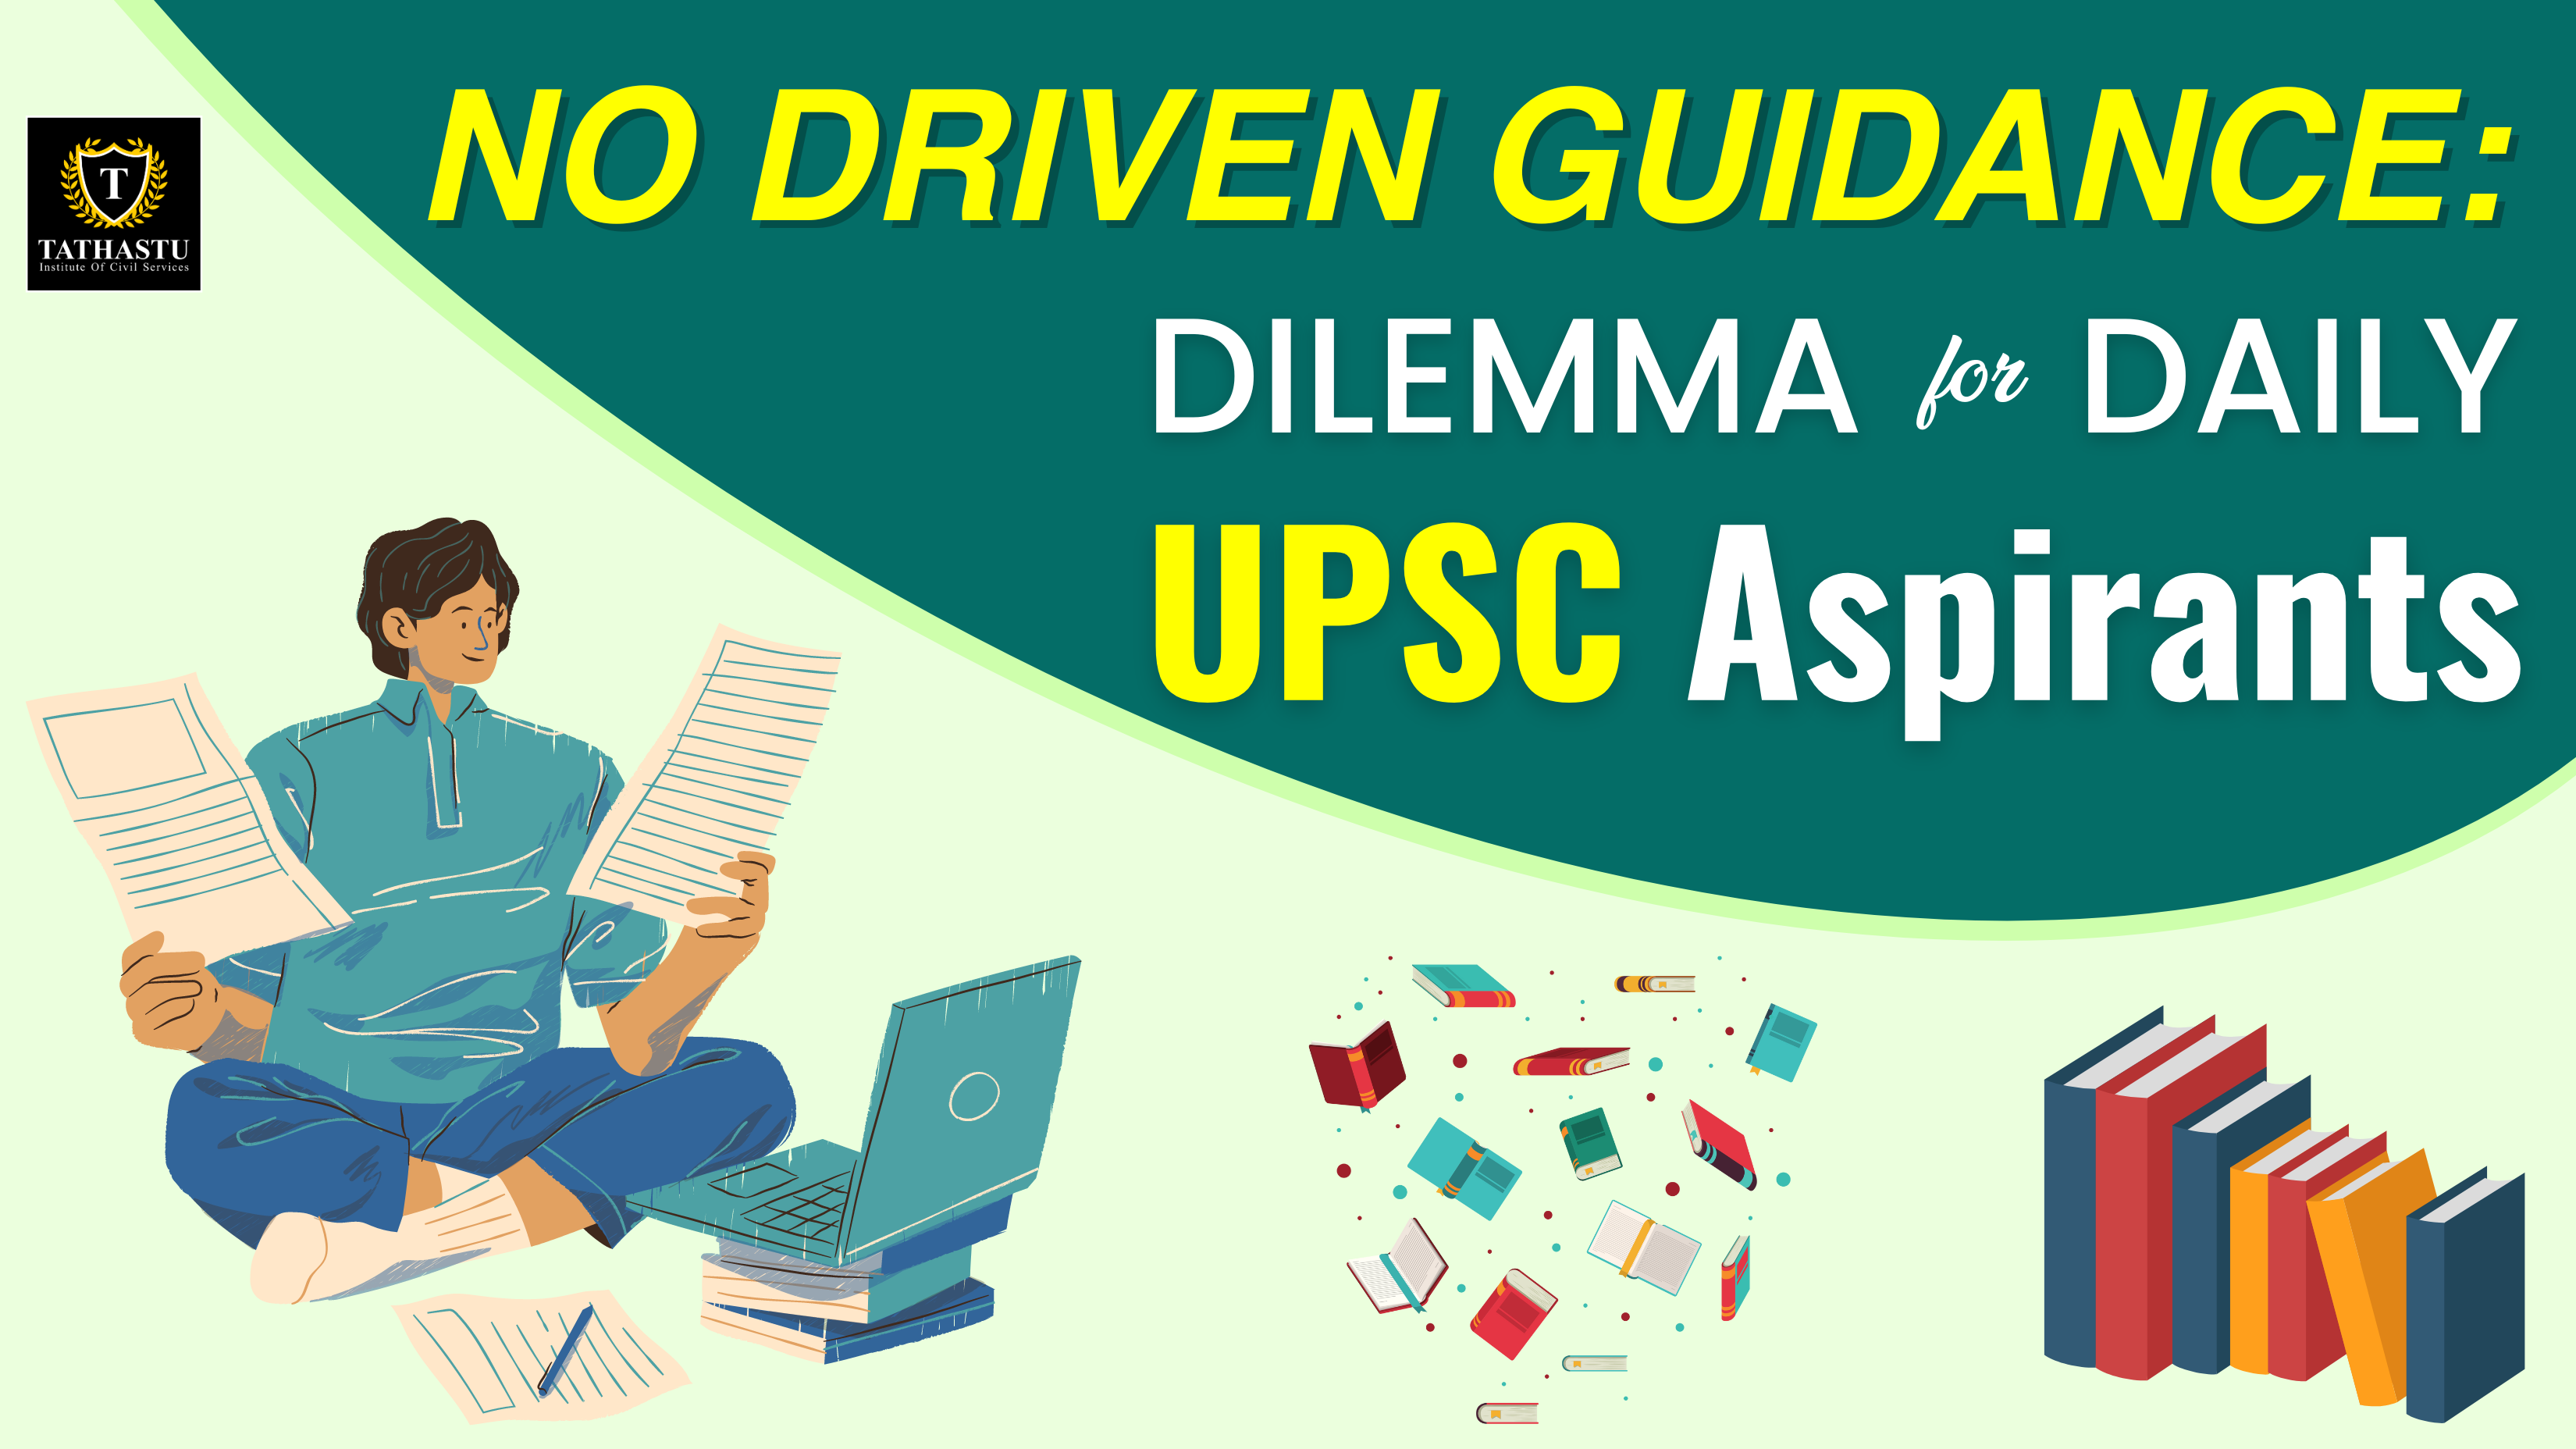 No Driven Guidance: A Dilemma For A Daily UPSC Aspirant